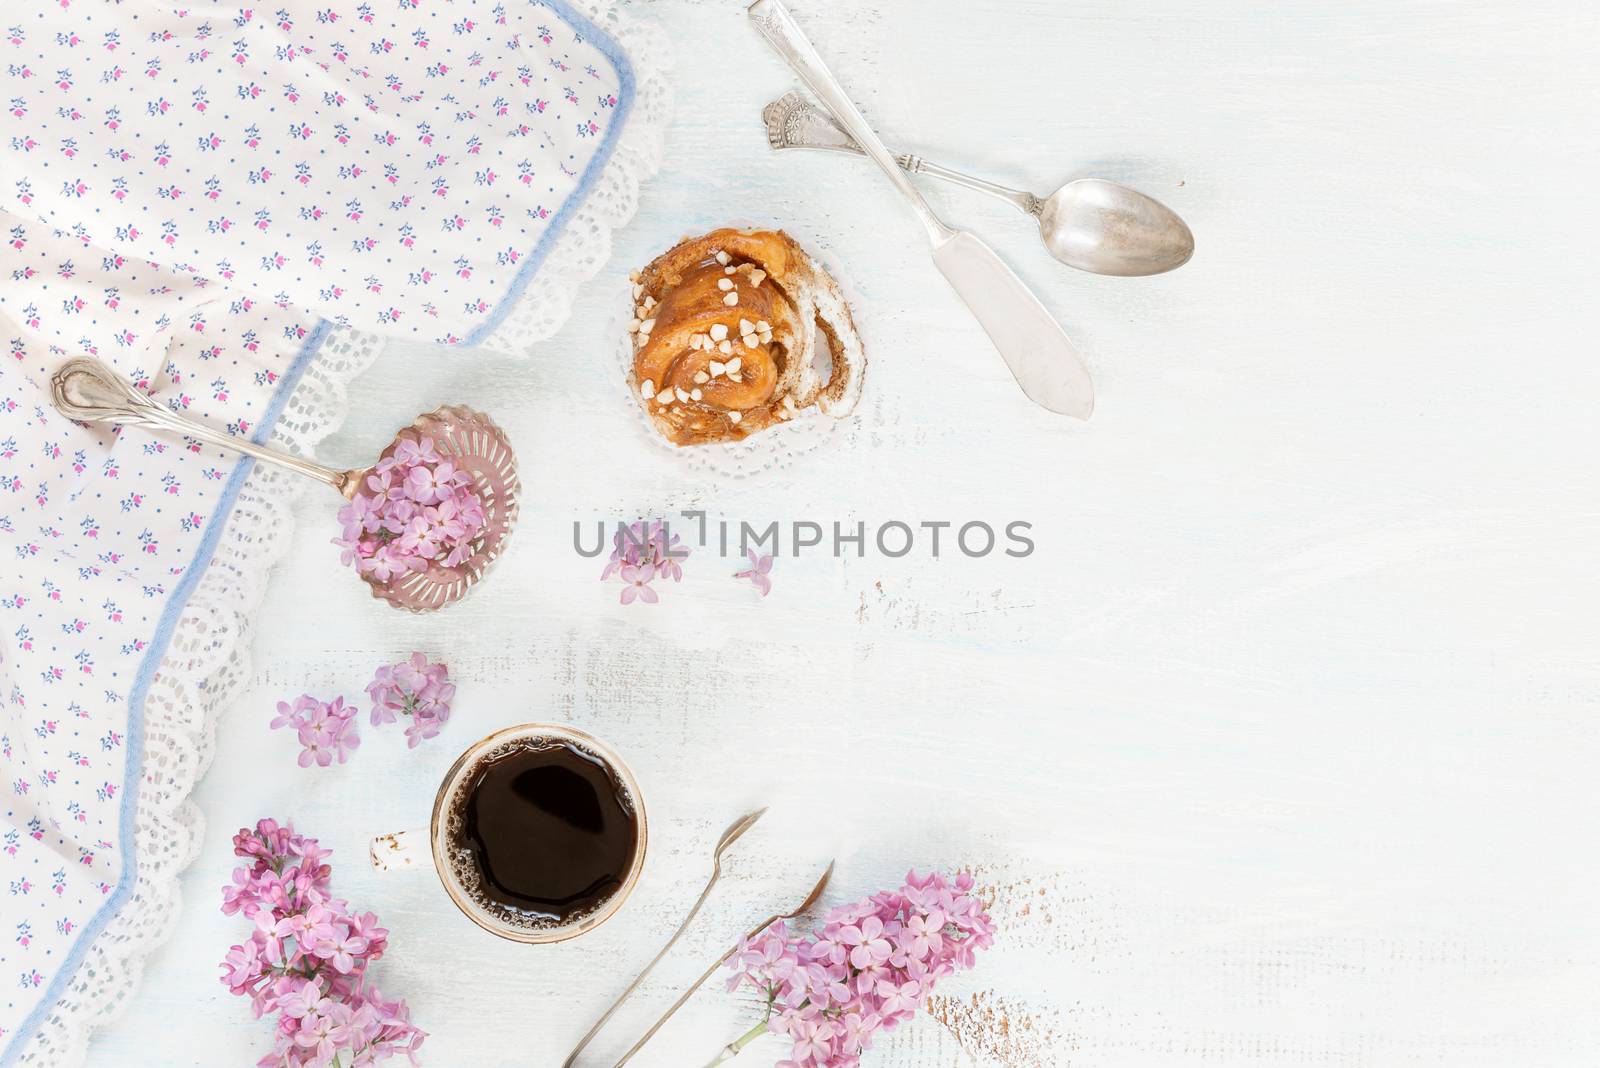 Breakfast consisting of a cup of black coffee and cinnamon bun, surrounded by lacy napkin and flowers of lilac on a light background; flat lay, top view, overhead view